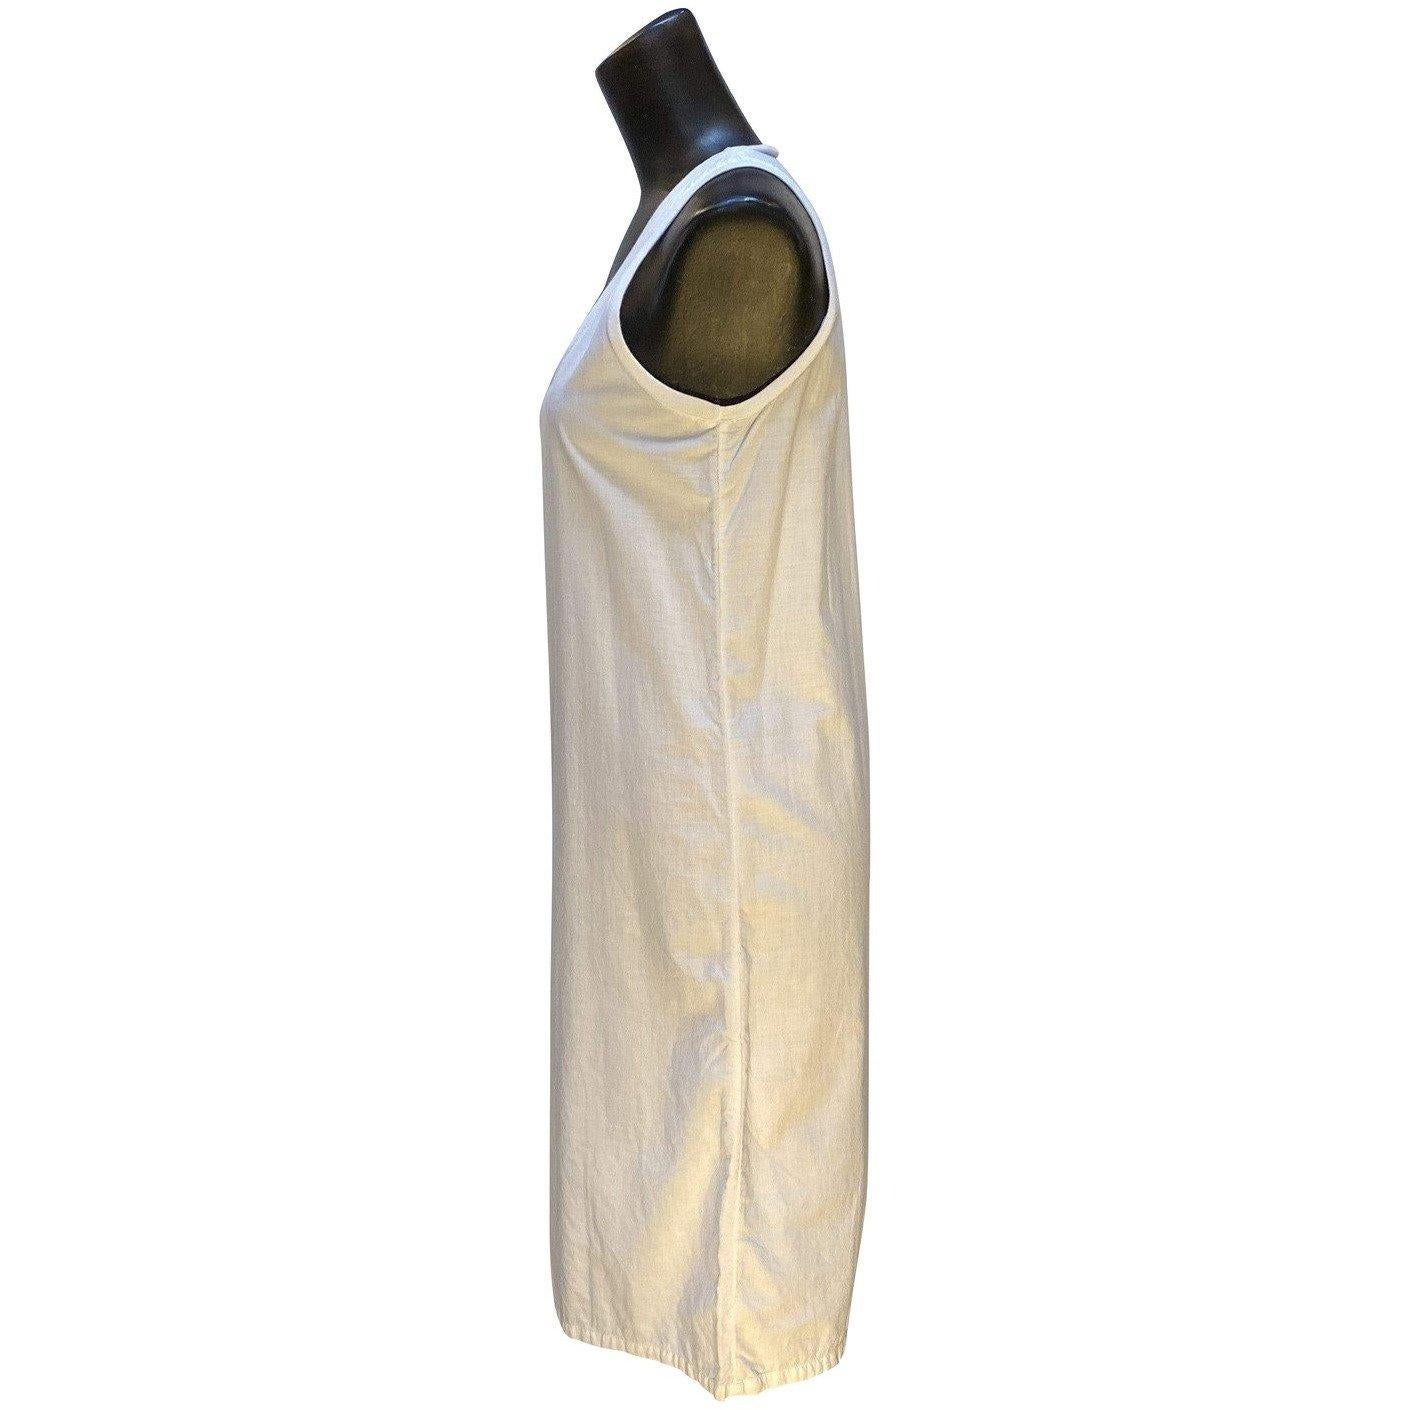 The possibilities are endless with the simplicity of this soft white Maison Martin Margiela 100% cotton knee length tank dress. Can be dressed up or down, be the center of attention or the base of a distinctly personalized ensemble.